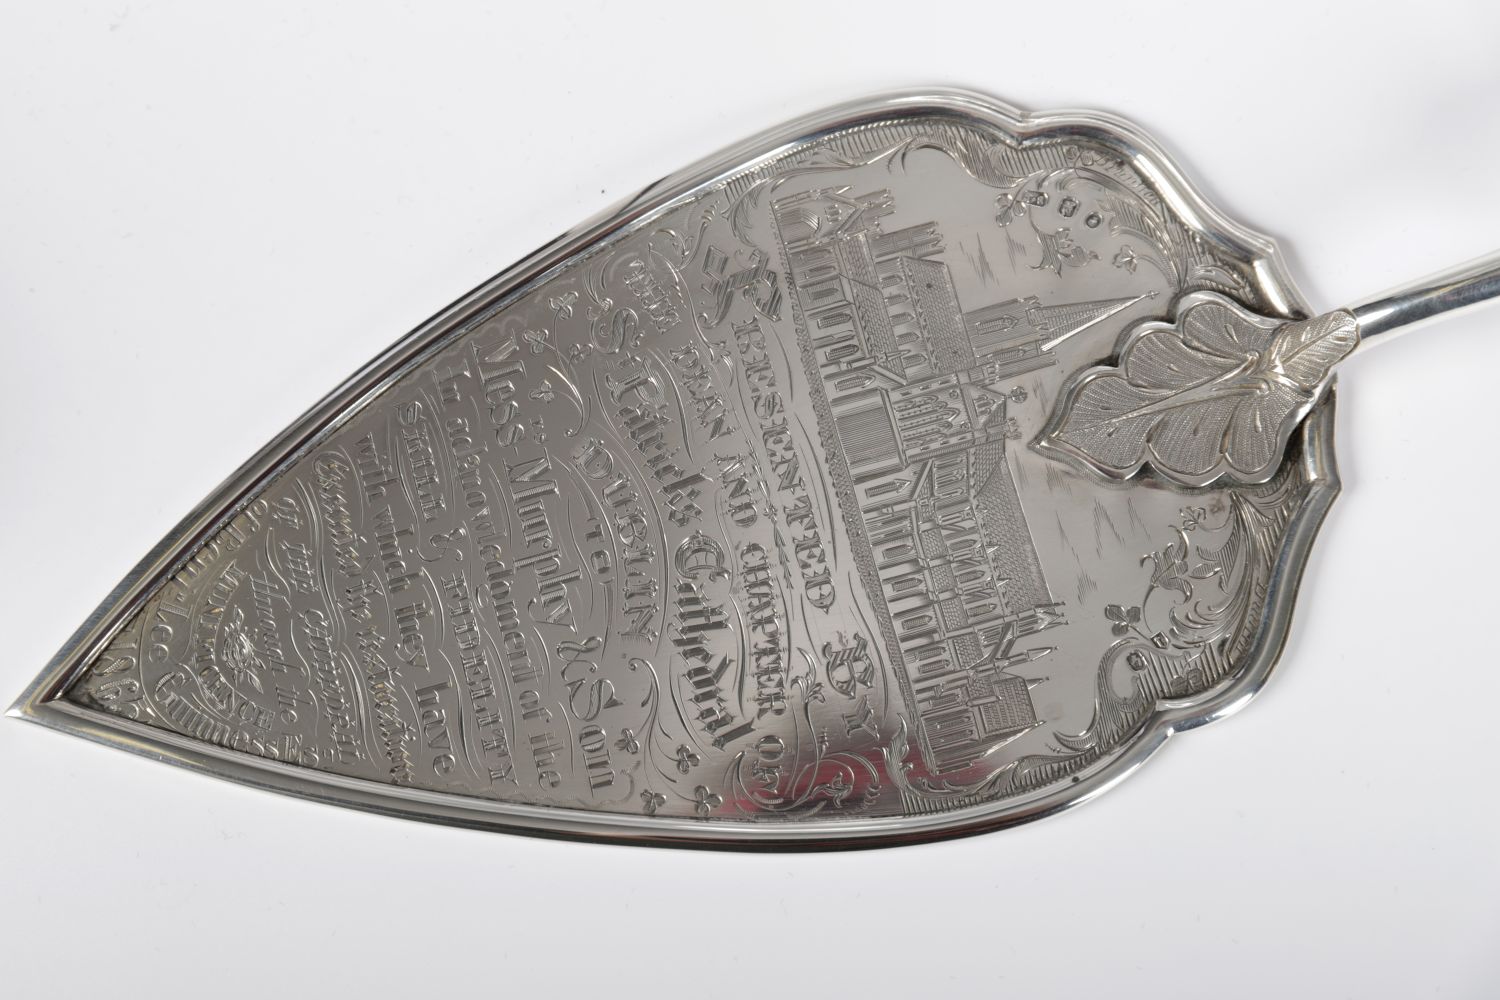 ST. PATRICK'S CATHEDRAL SILVER PRESENTATION TROWEL - Image 2 of 4